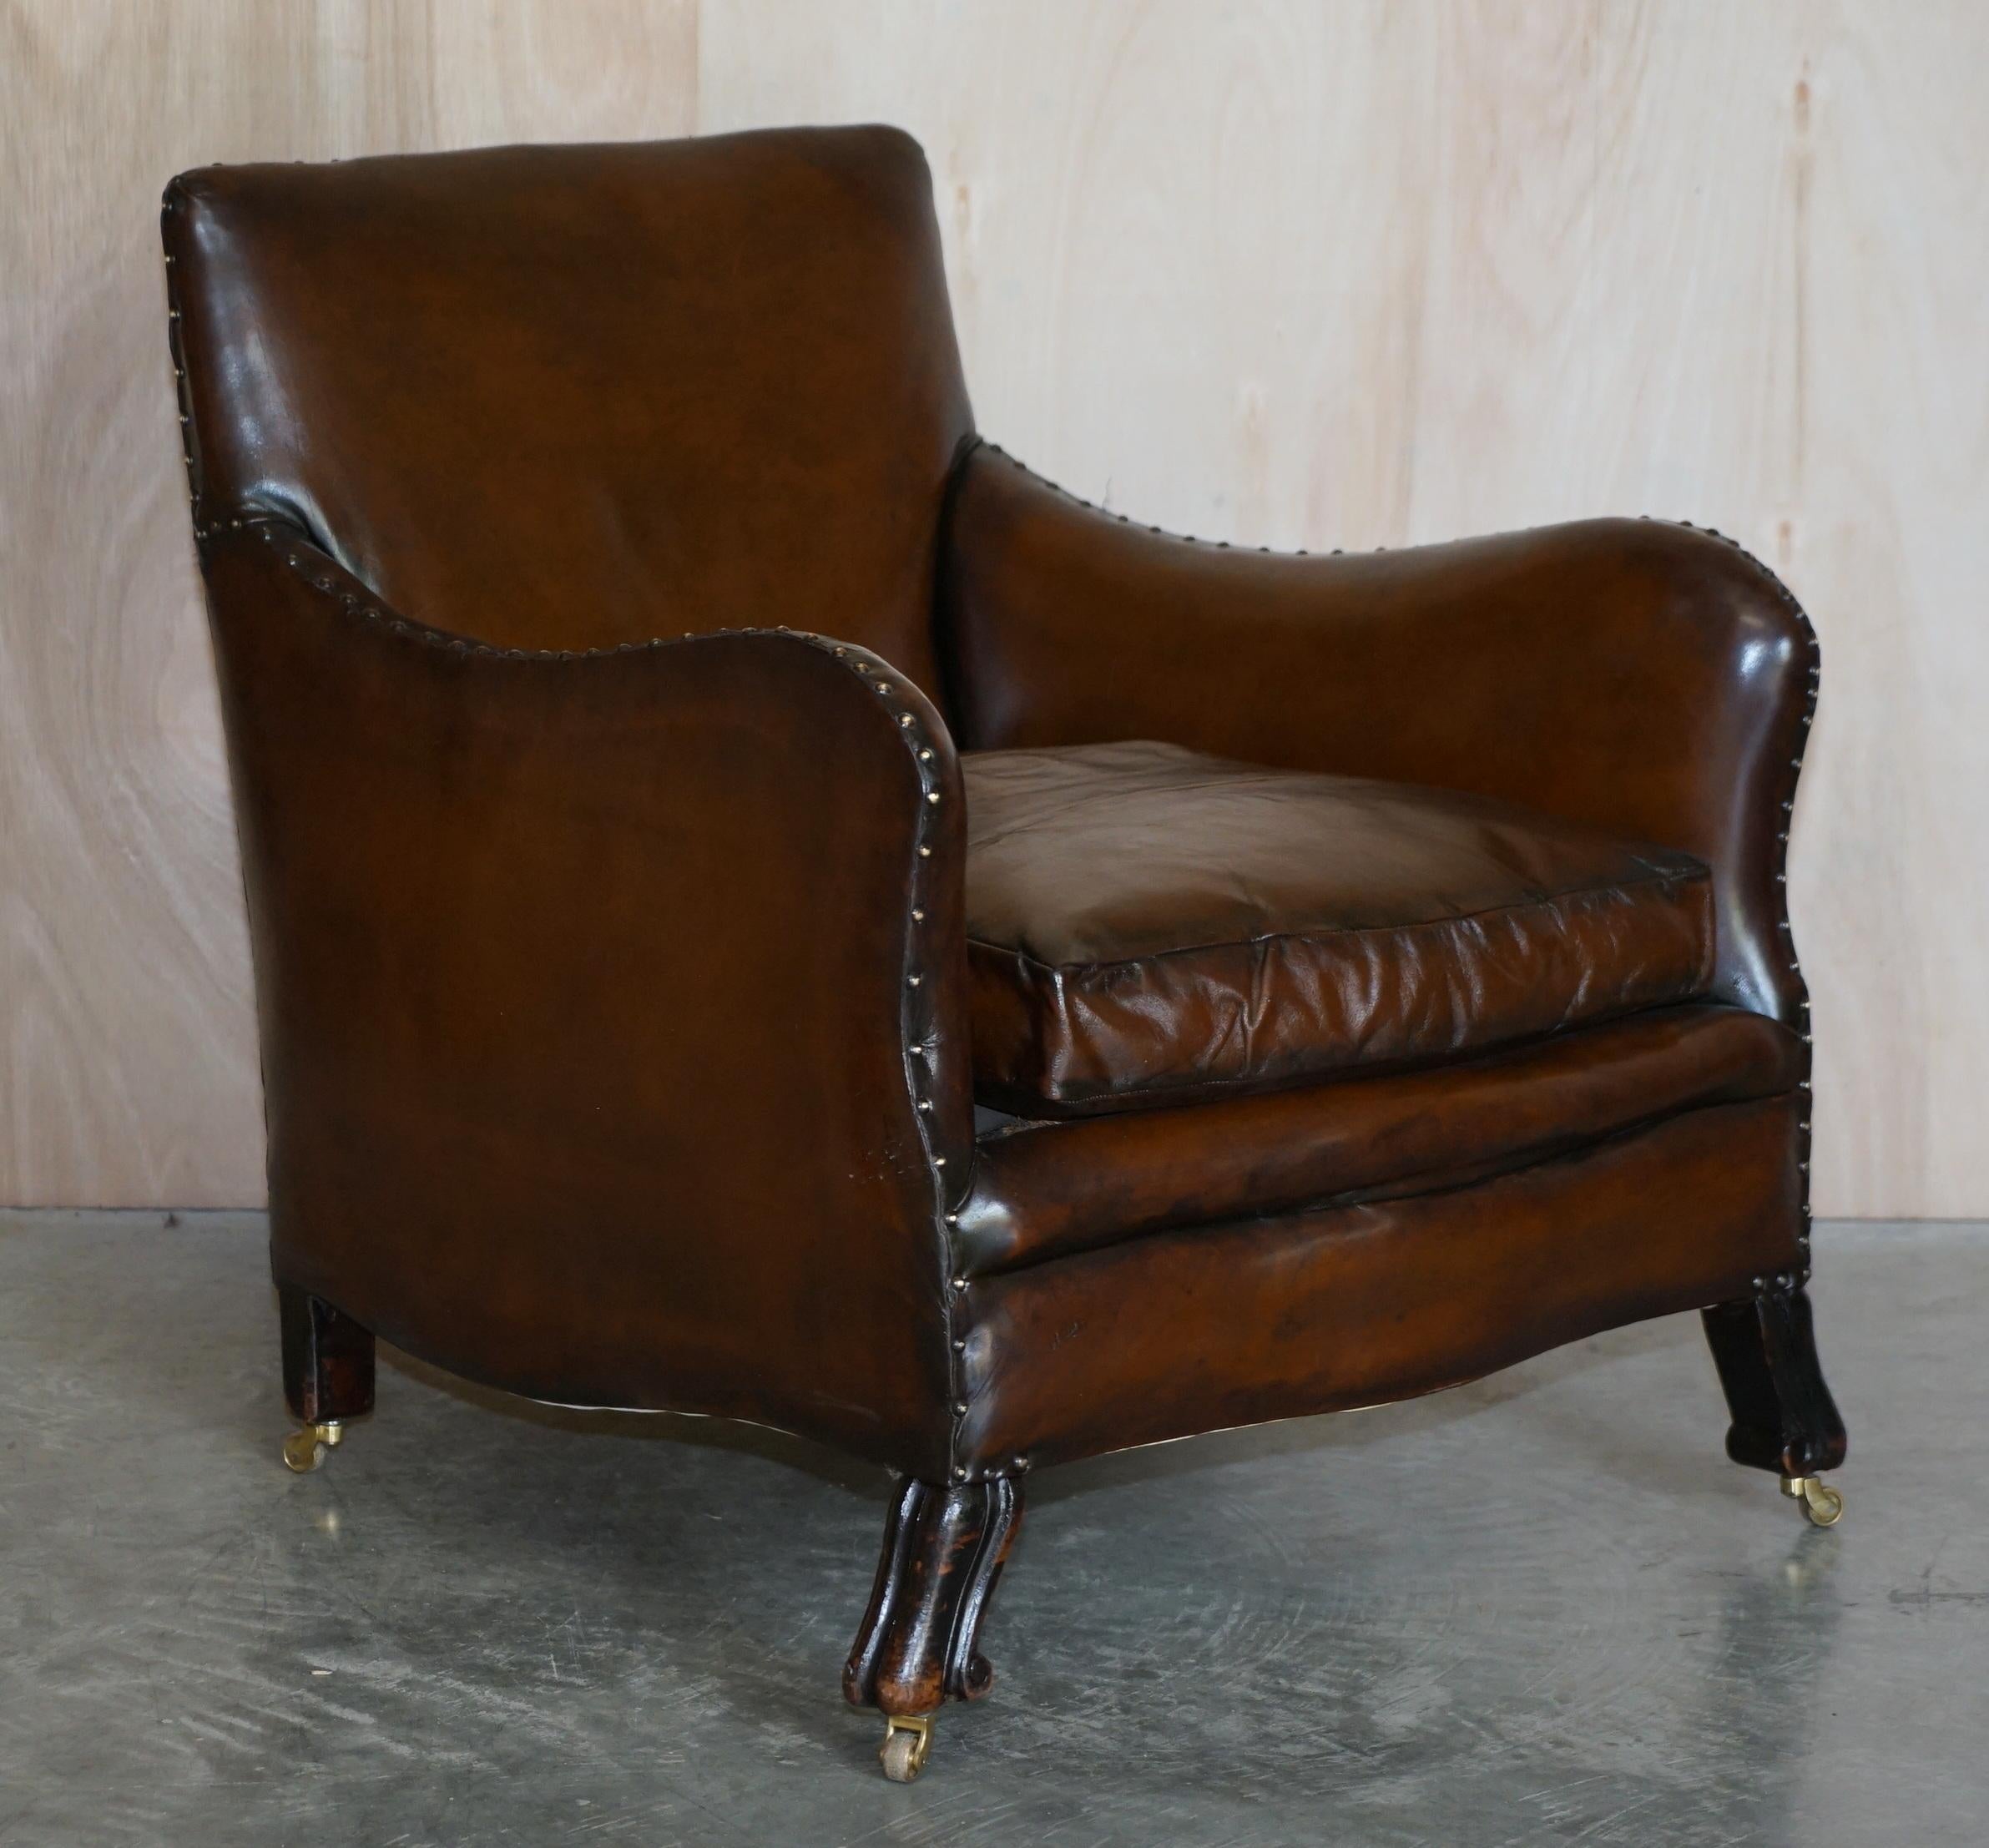 We are delighted to offer for sale this stunning pair of fully restored, hand dyed Cigar brown leather, Spanish club armchairs with ornately caved elegant legs

An exceptionally good looking well-made and substantial armchairs. They are